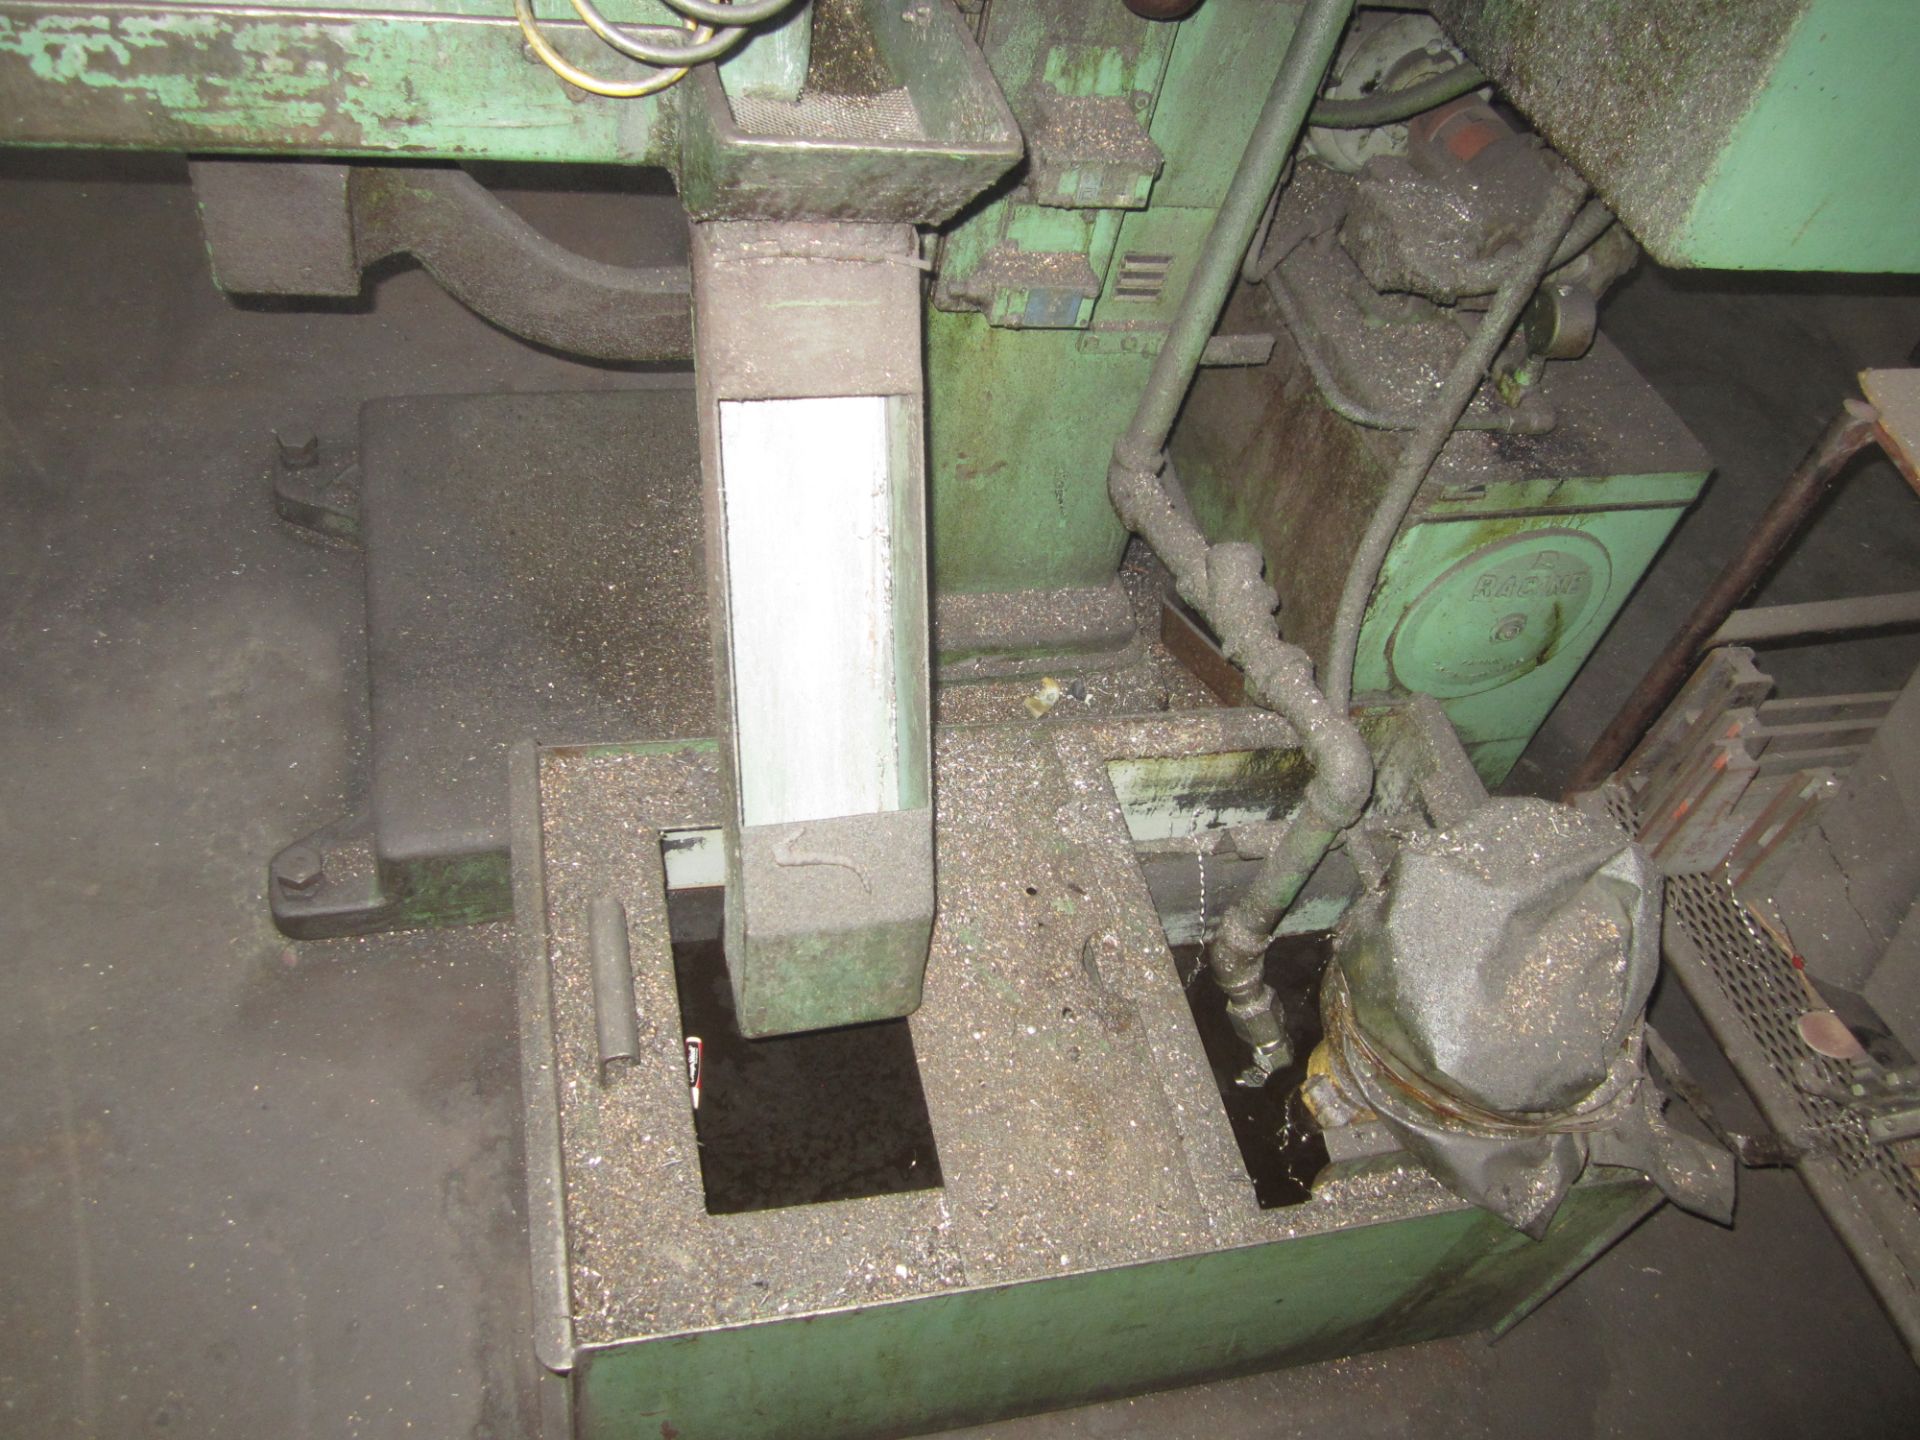 Natco Model F1-B Multi Spindle Drilling and Tapping Machine, s/n H6-998,12-Spindle - Image 5 of 7